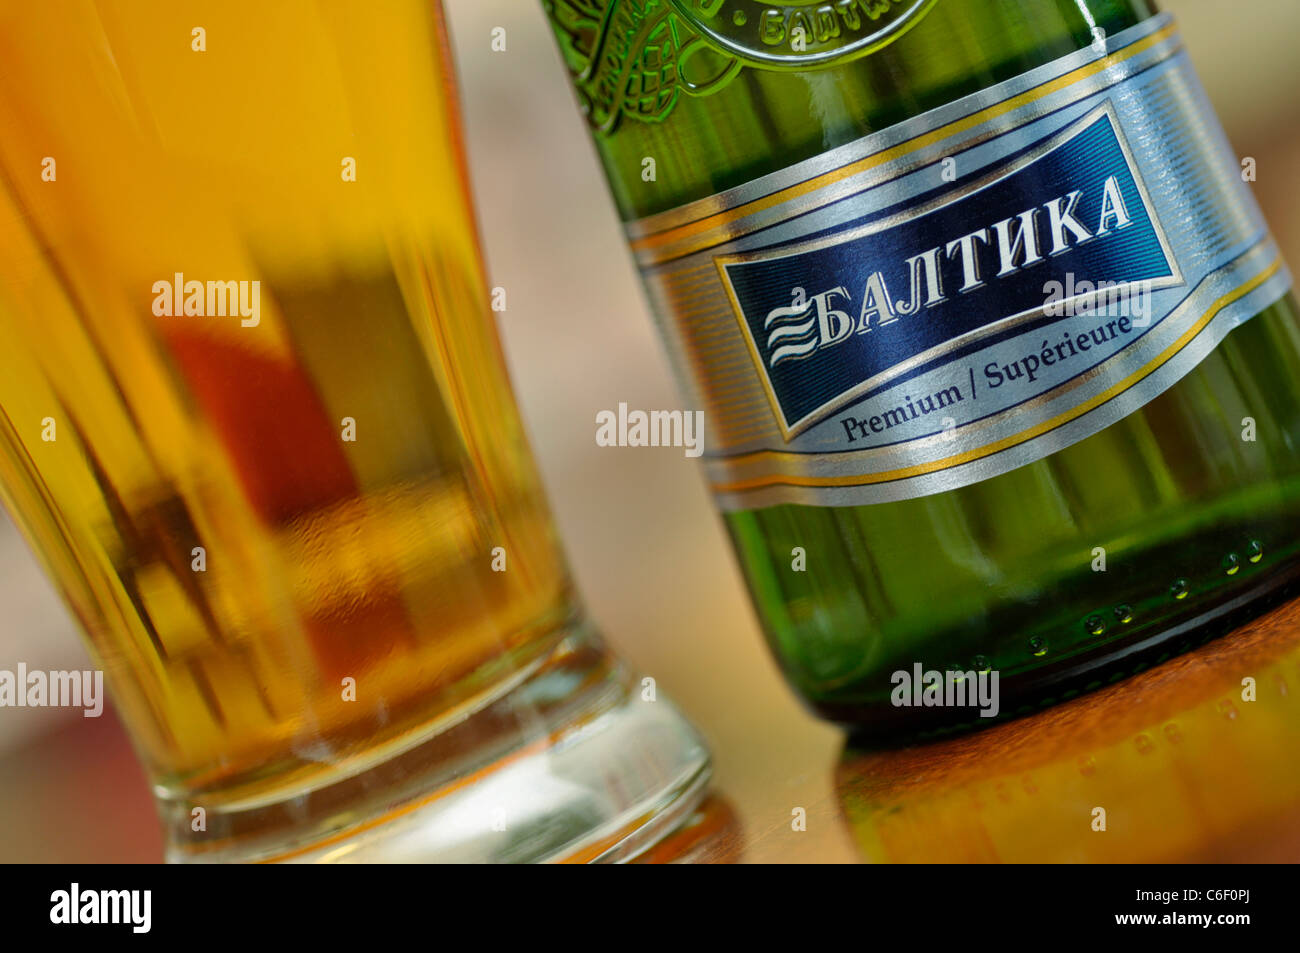 Closeup of Beer Bottle and Glass, Russian Beer / Lager Baltika Stock Photo